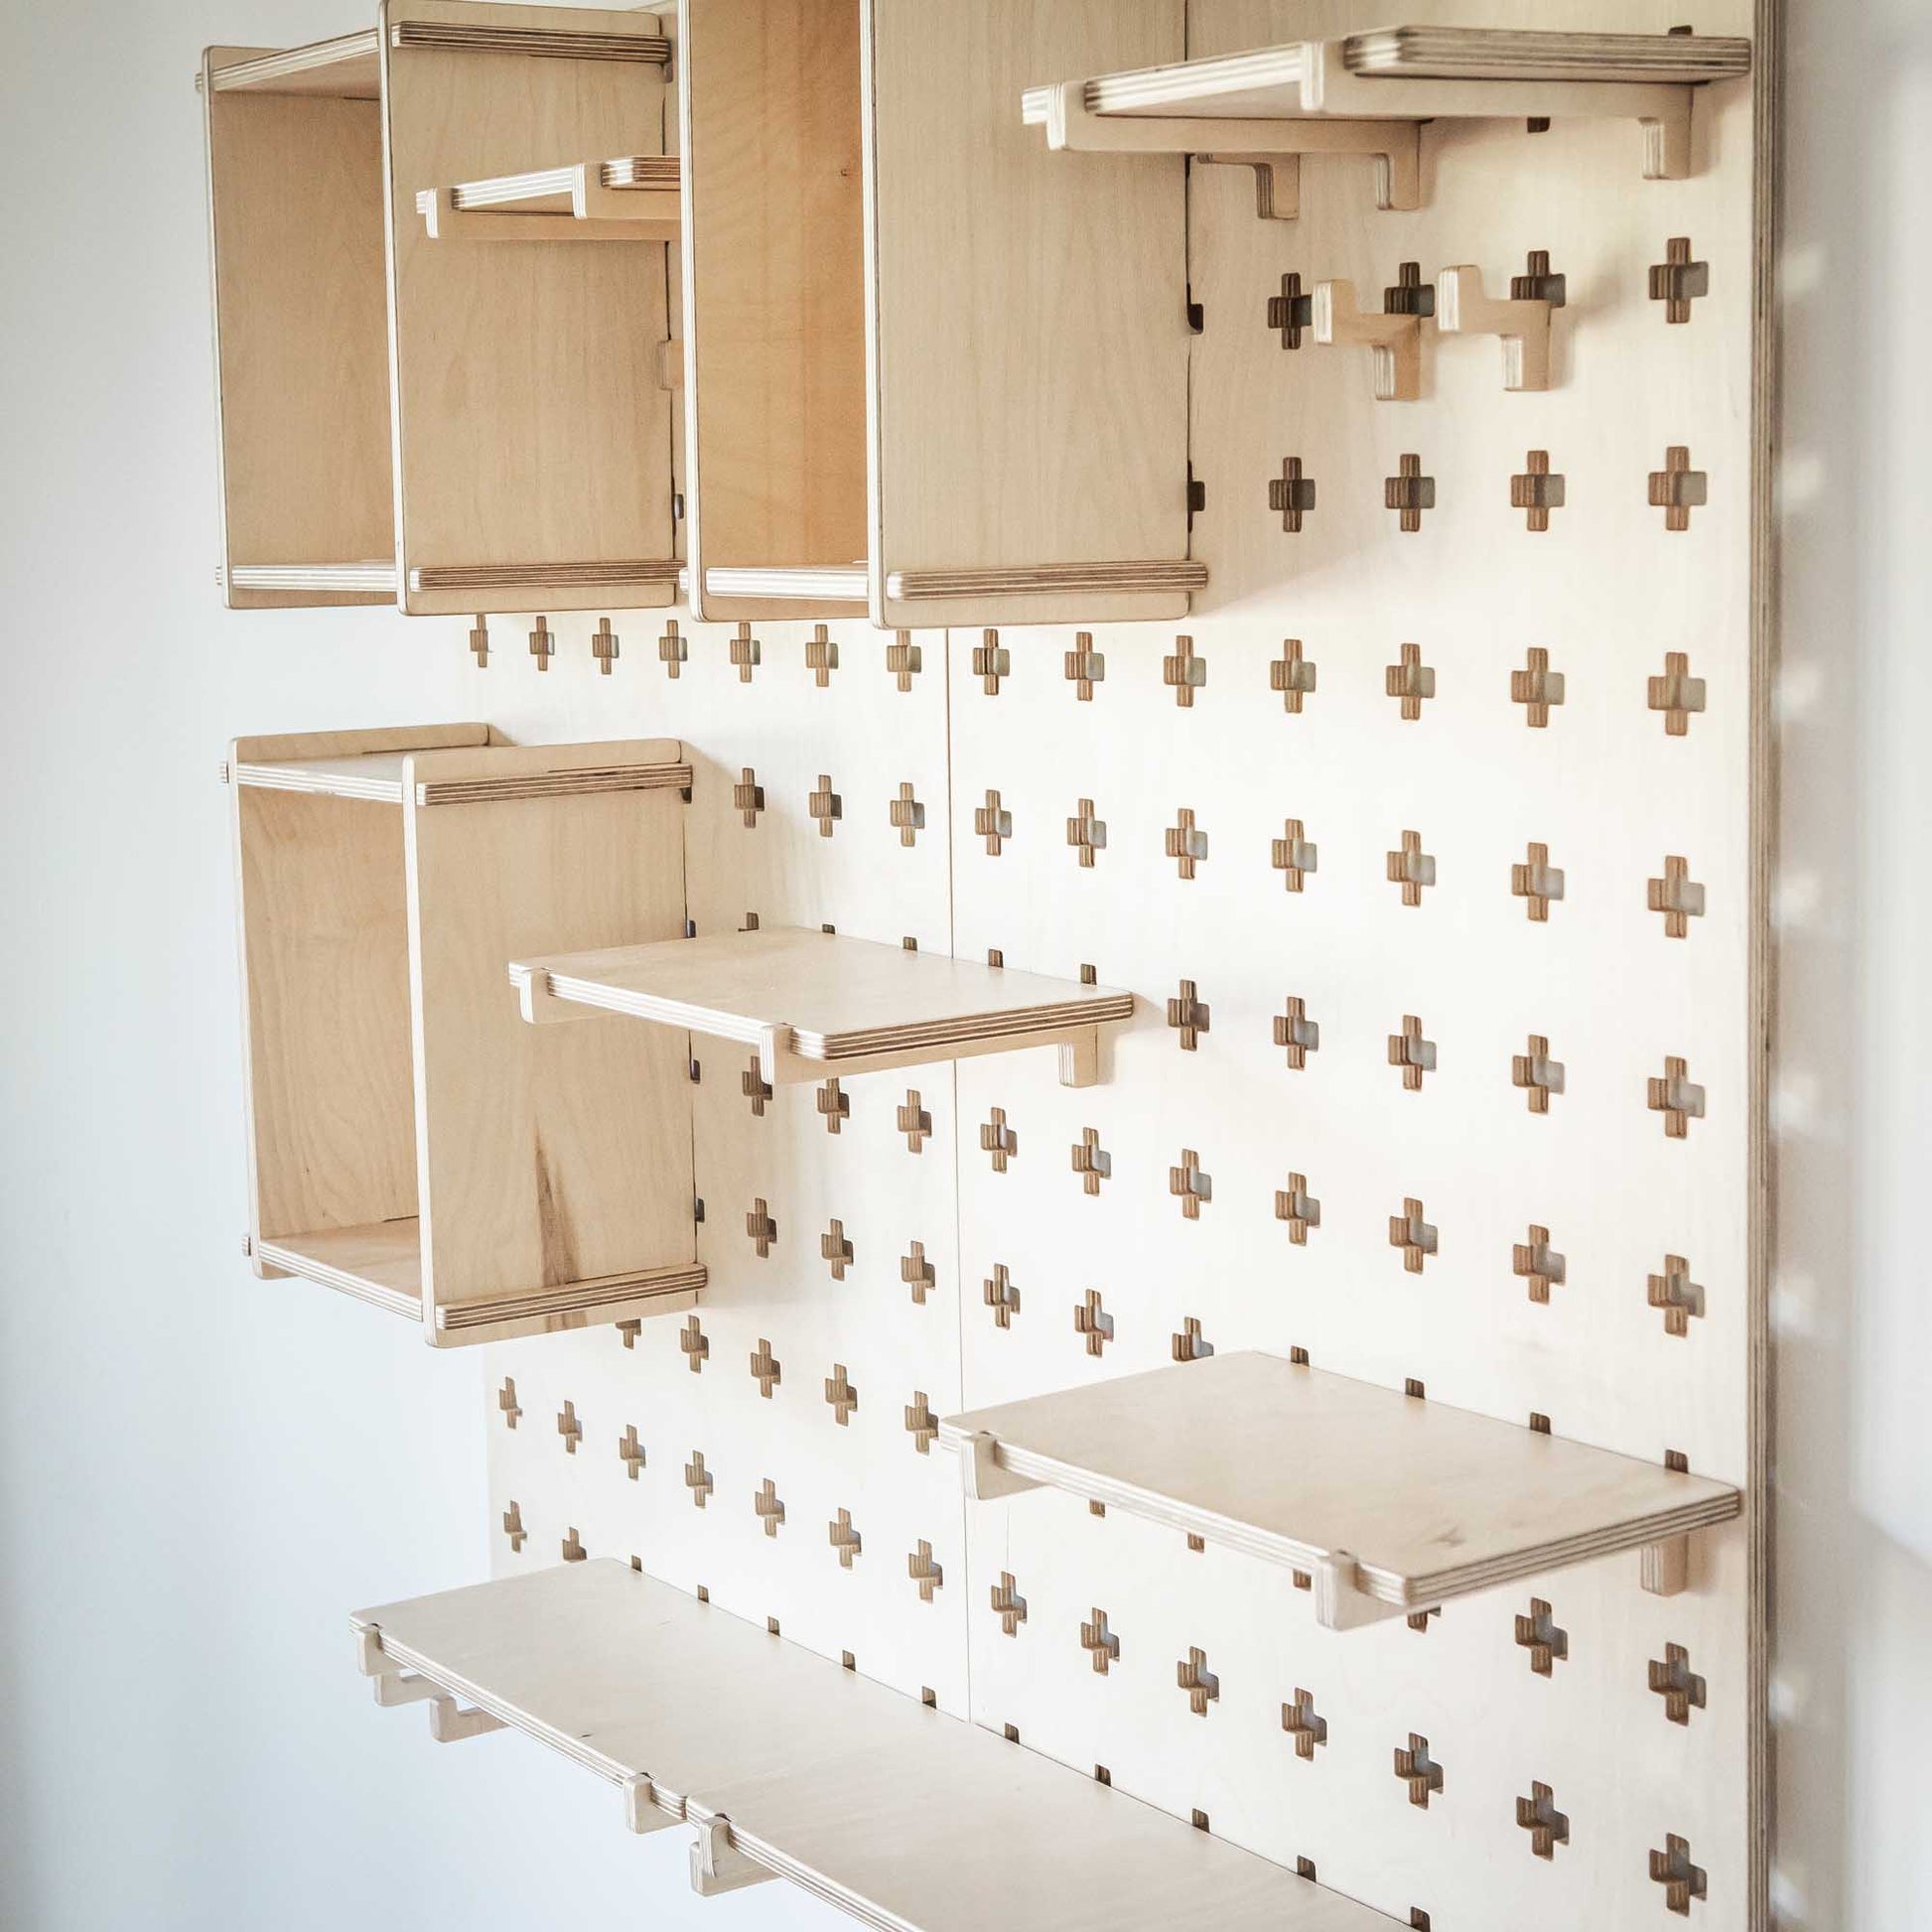 A Large Pegboard Display Stand from Sweet HOME from wood, providing open storage shelves with a cross on it.